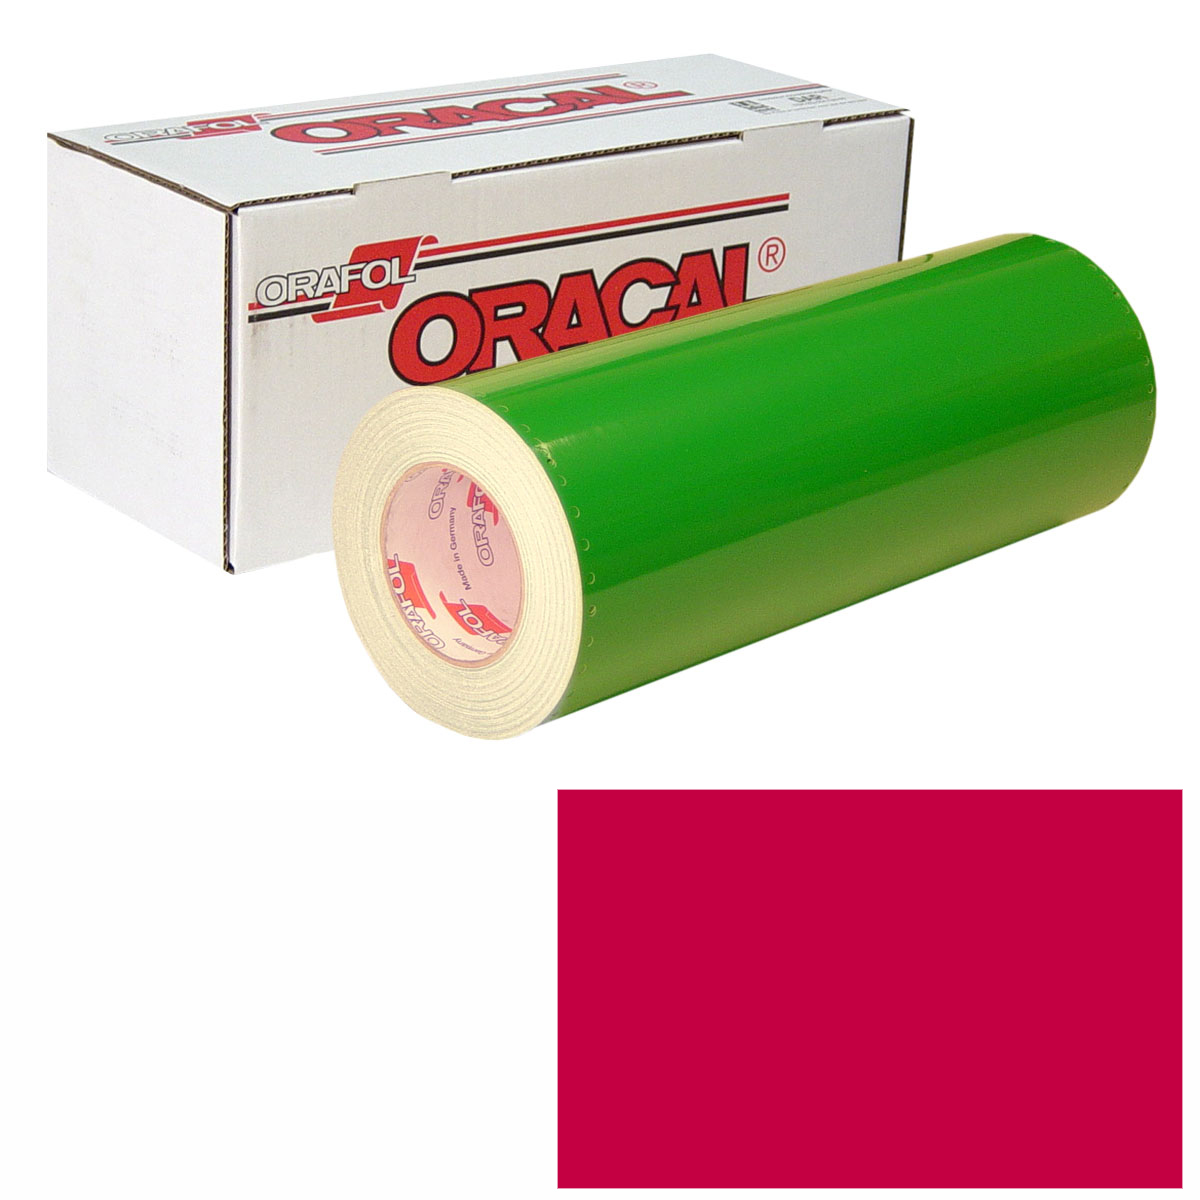 ORACAL 651 30in X 10yd 031 Red